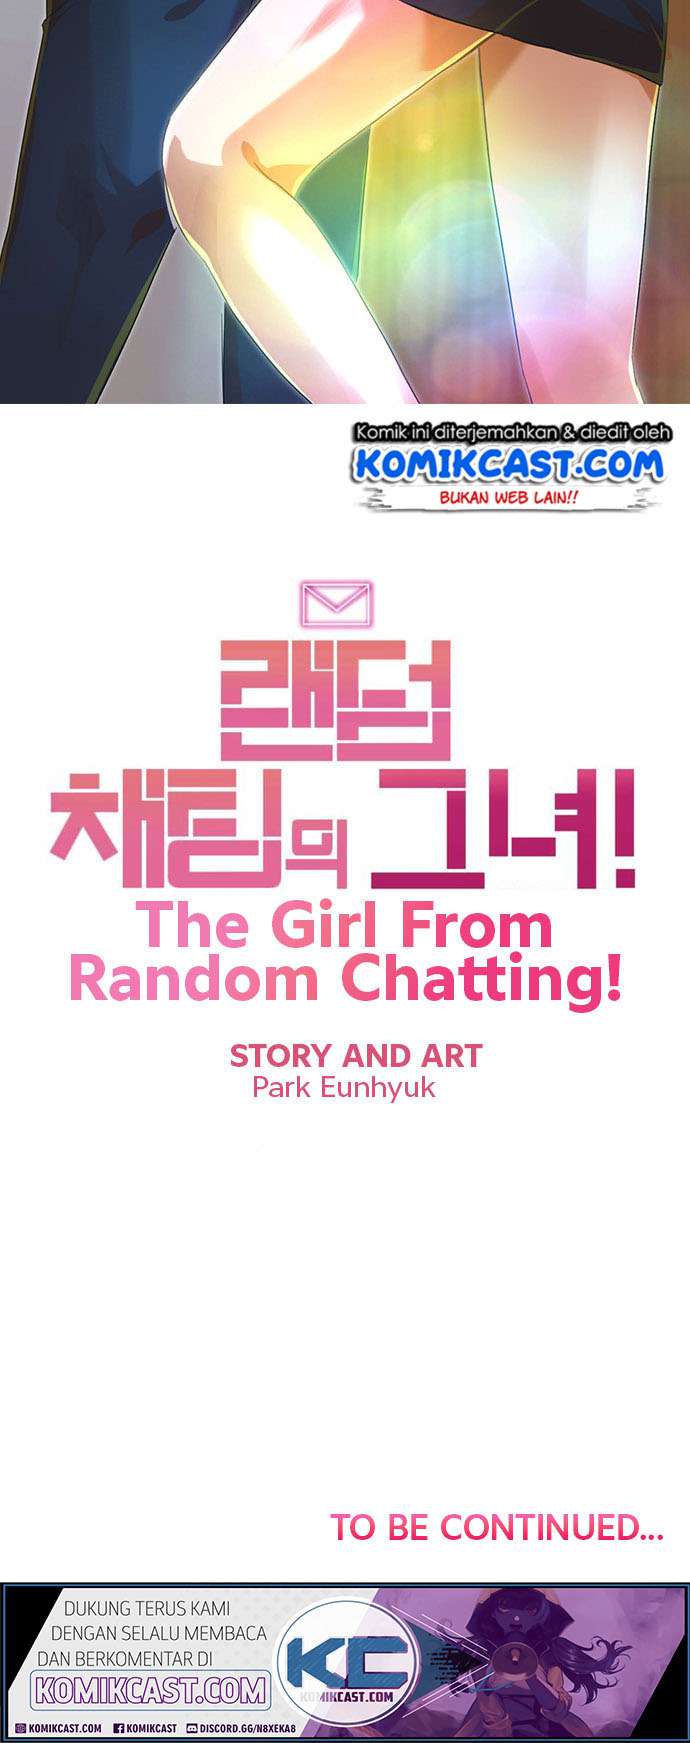 The Girl from Random Chatting! Chapter 118